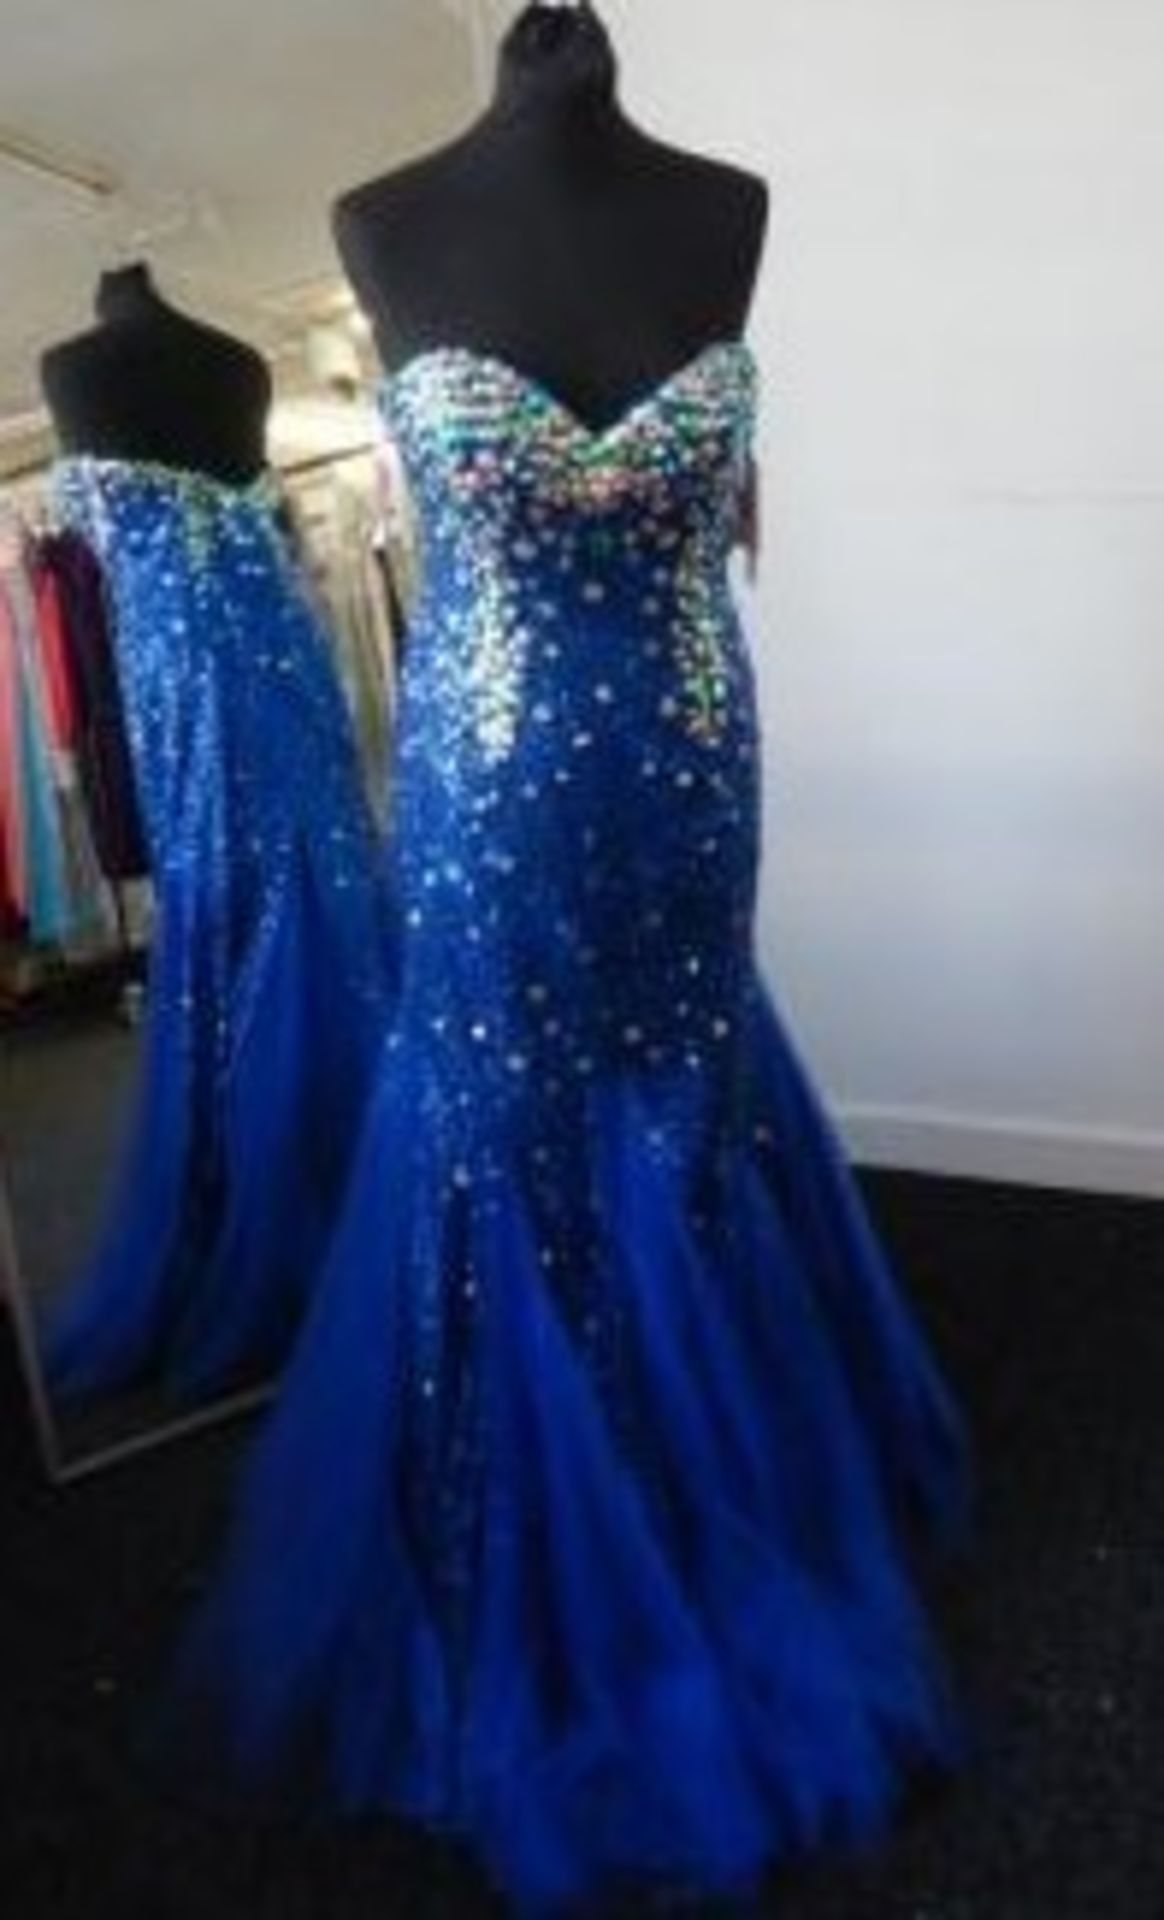 New Prom Dress By Alexia Designs